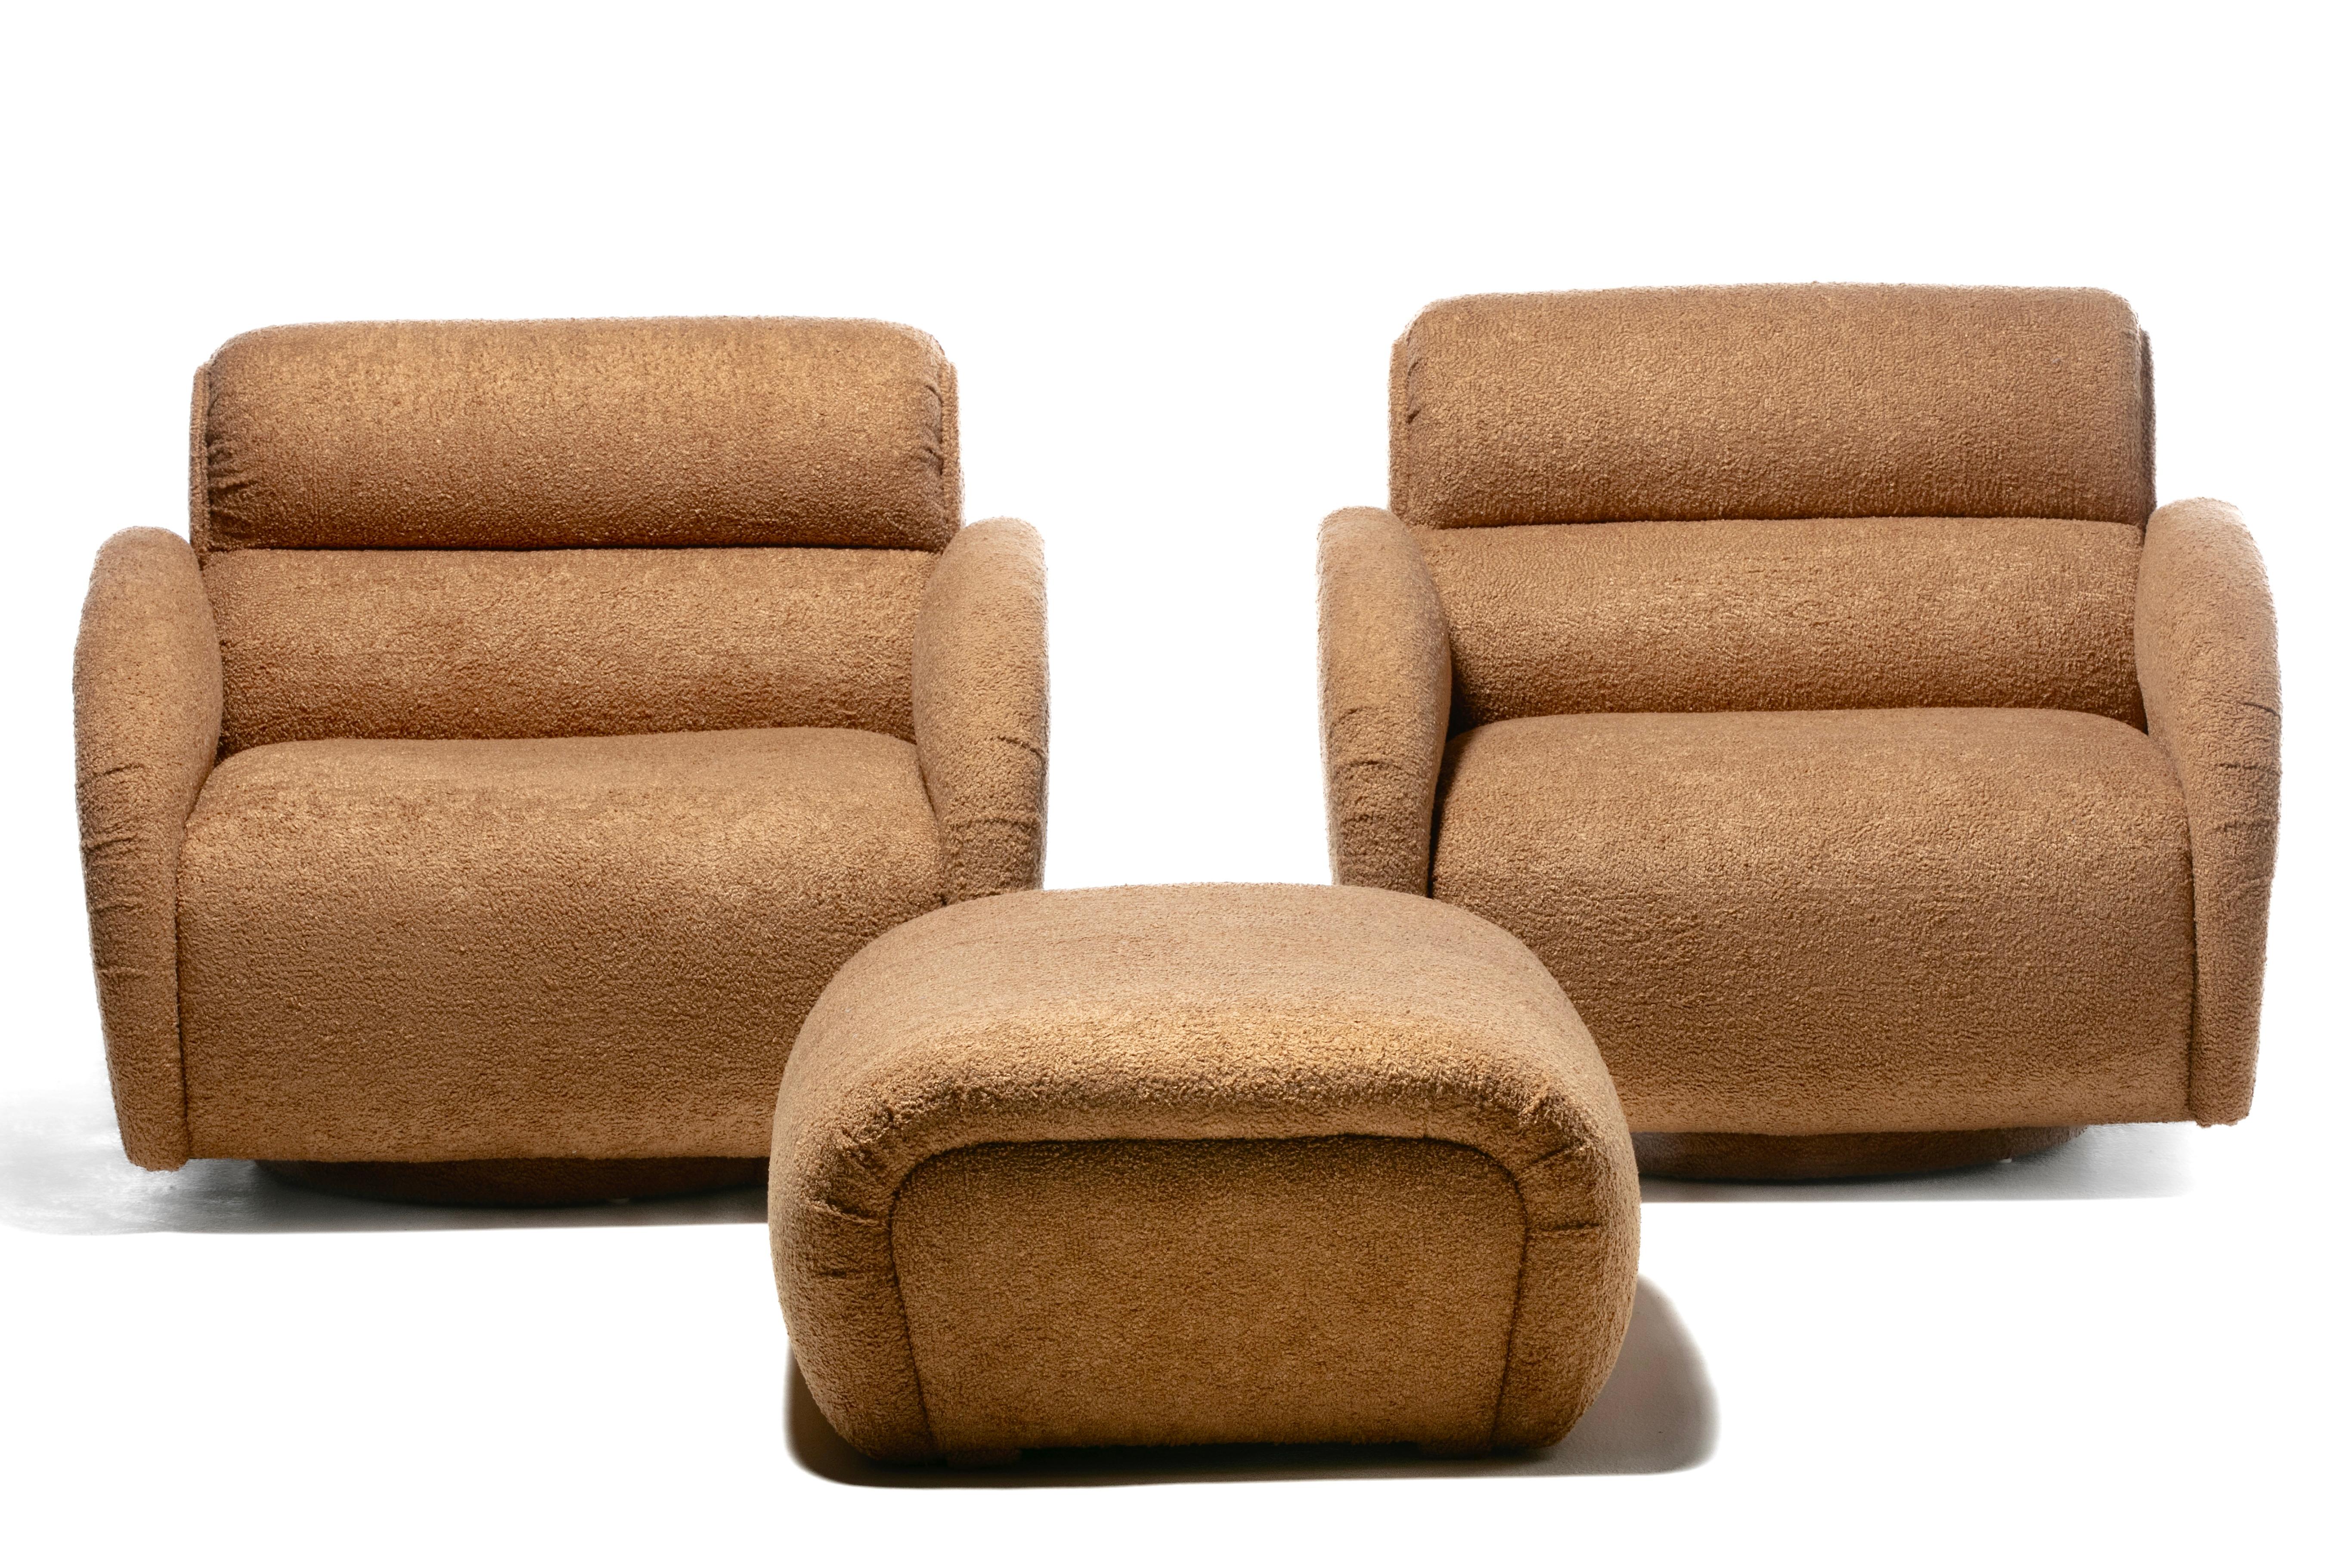 Large Scale Directional Post Modern Swivel Chairs & Ottoman in Mocha Fabric For Sale 14